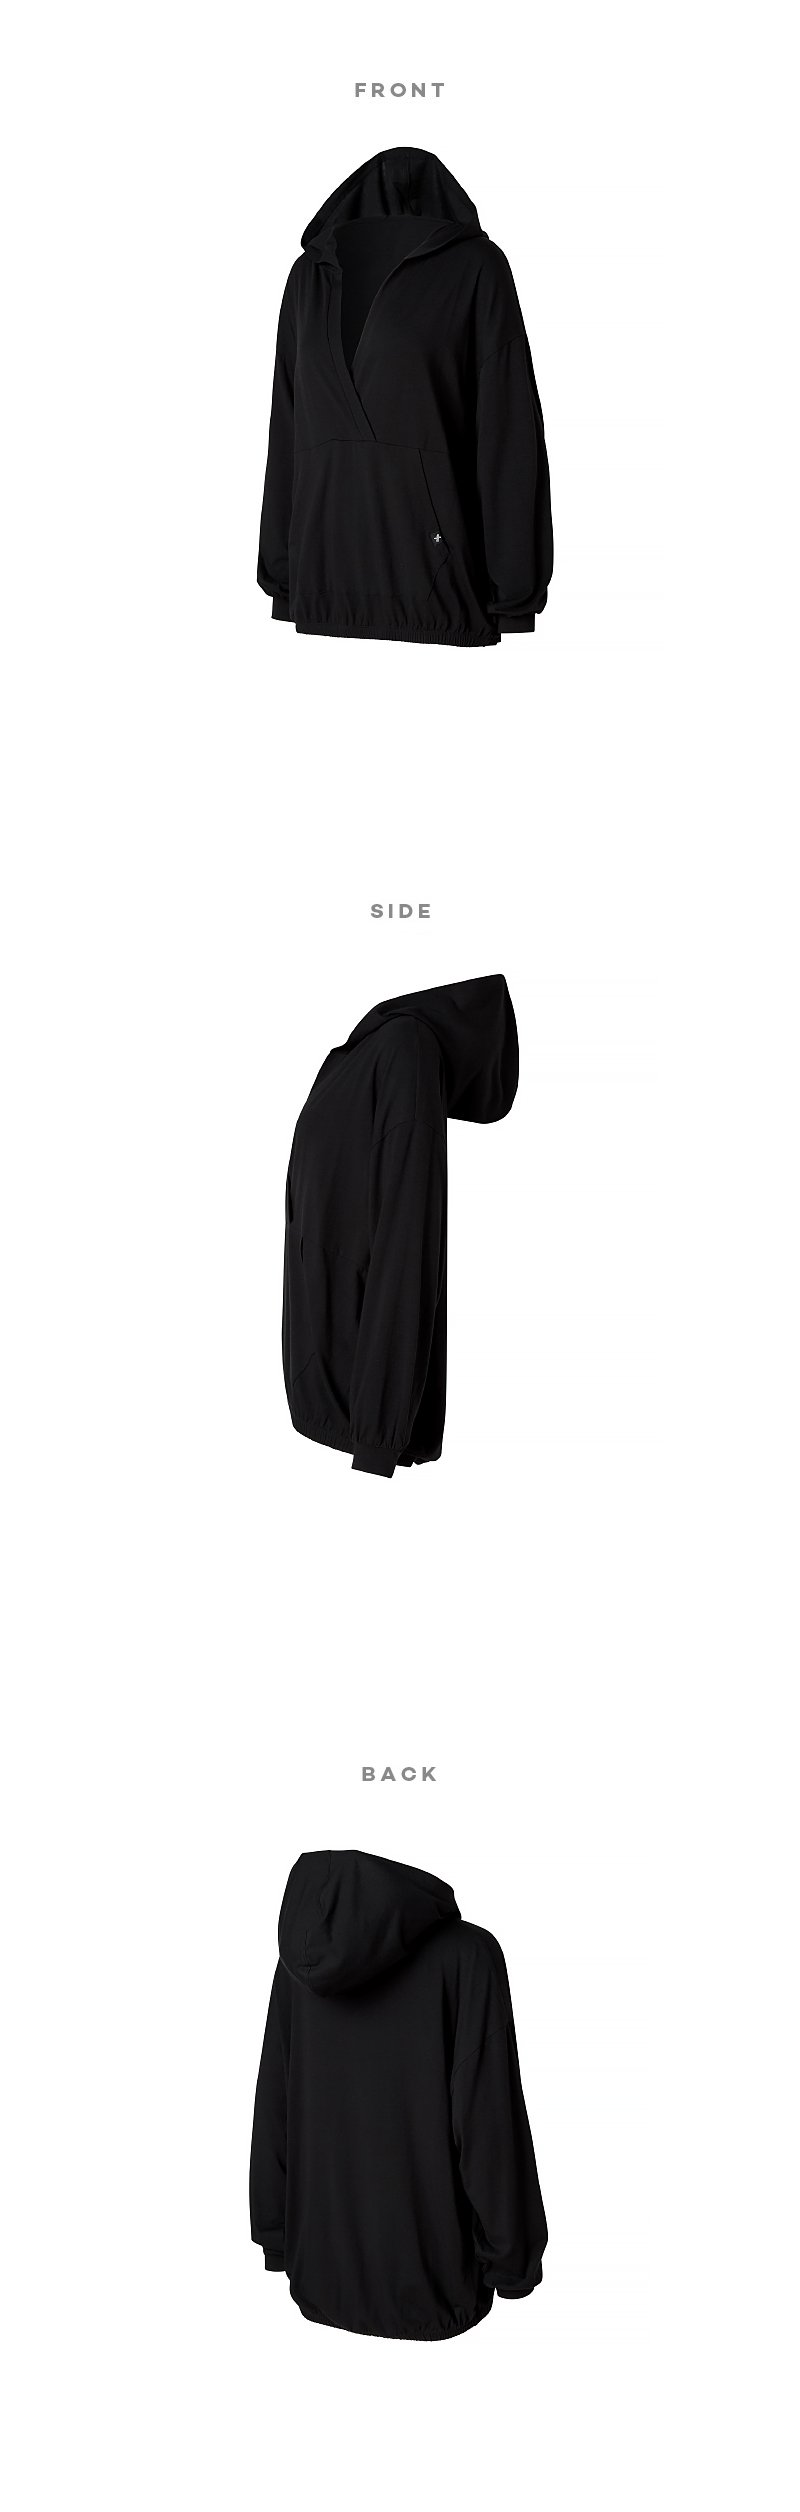 Loose Fit Cover Up Hood Black 6